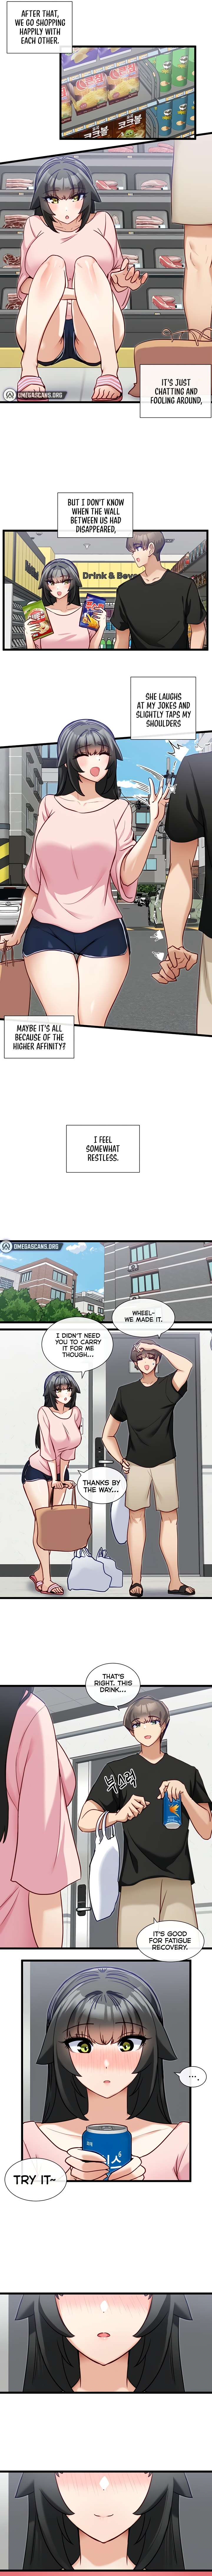 Heroine App - Chapter 14 Page 6